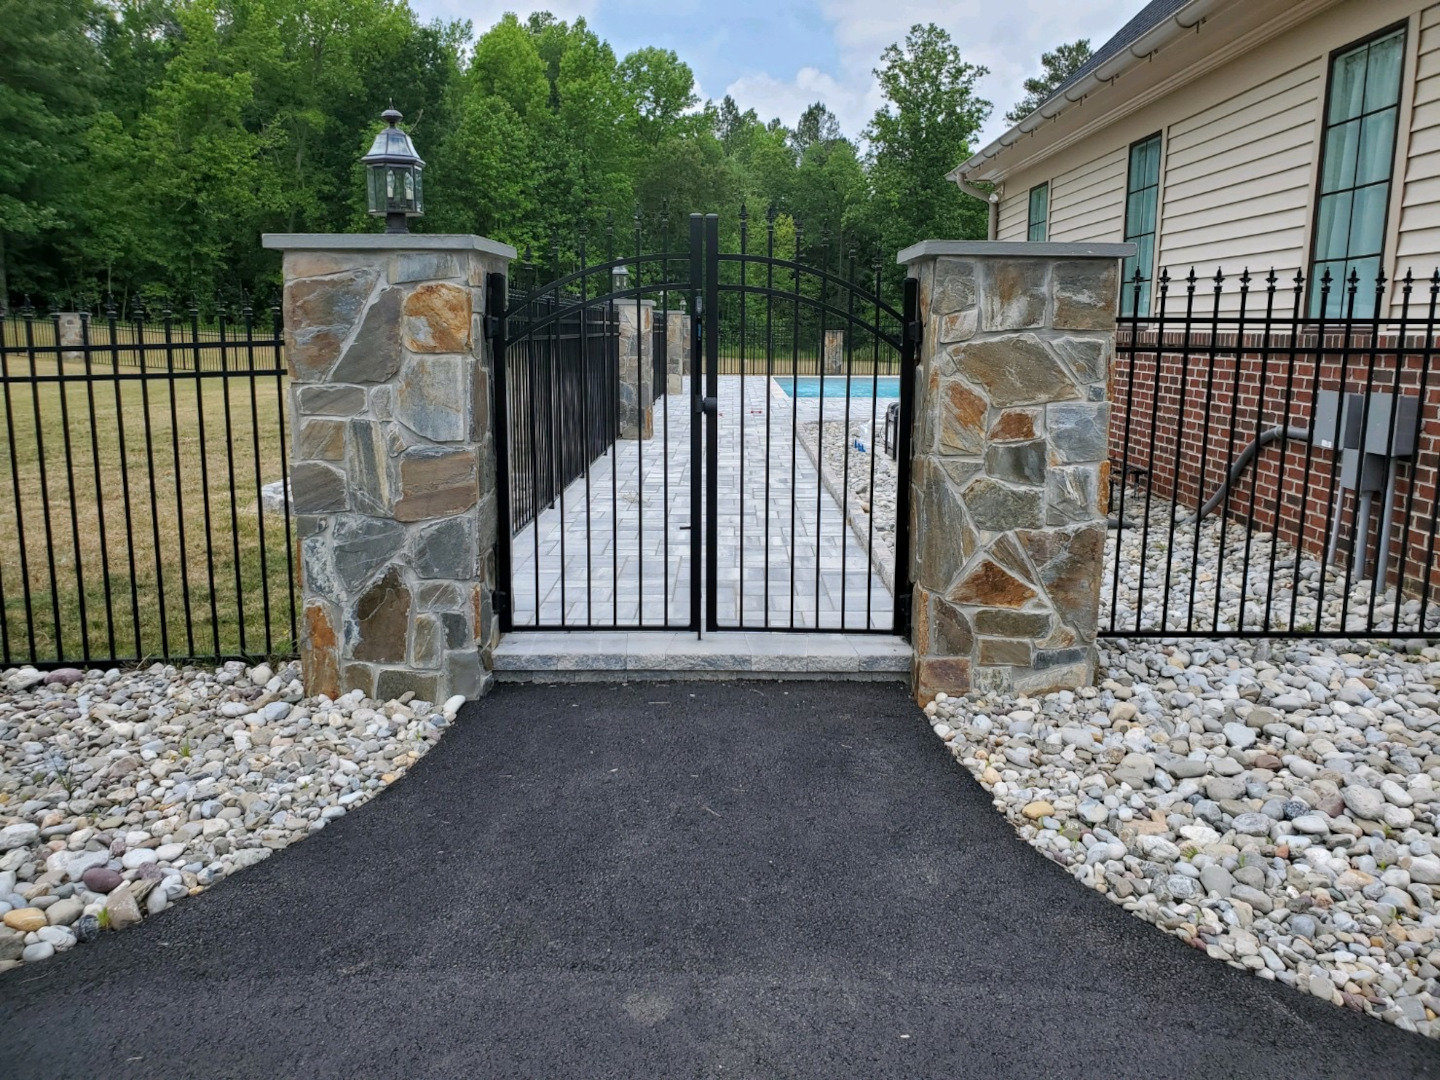 Five foot high, series-b 3-rail aluminum fence with finials and an arched gate on stone columns.